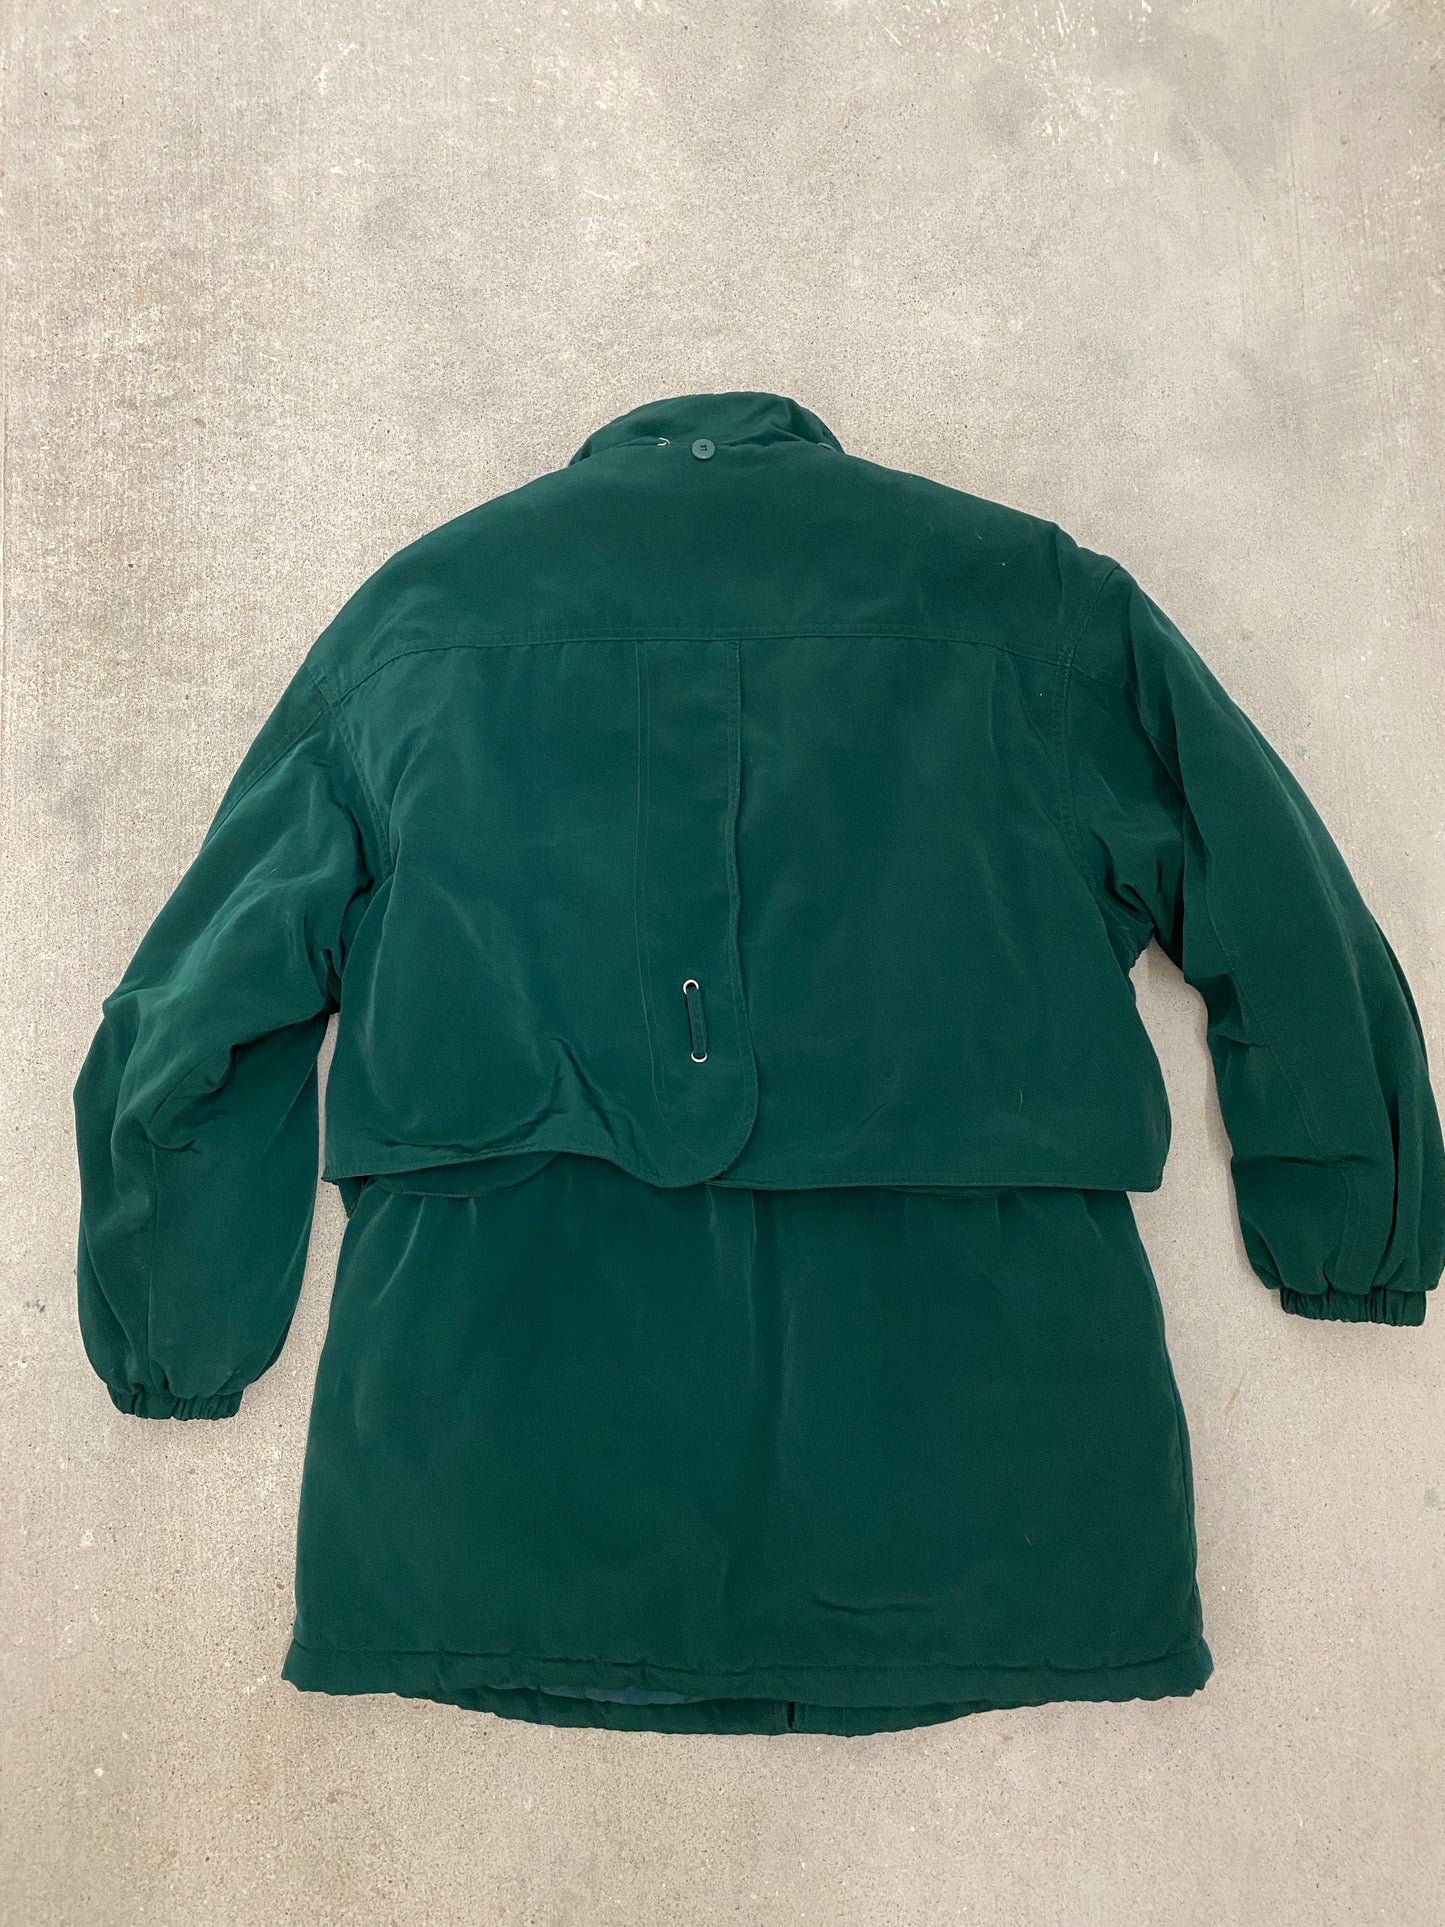 Vintage Green Cinch Jacket with Gold Accents (S)